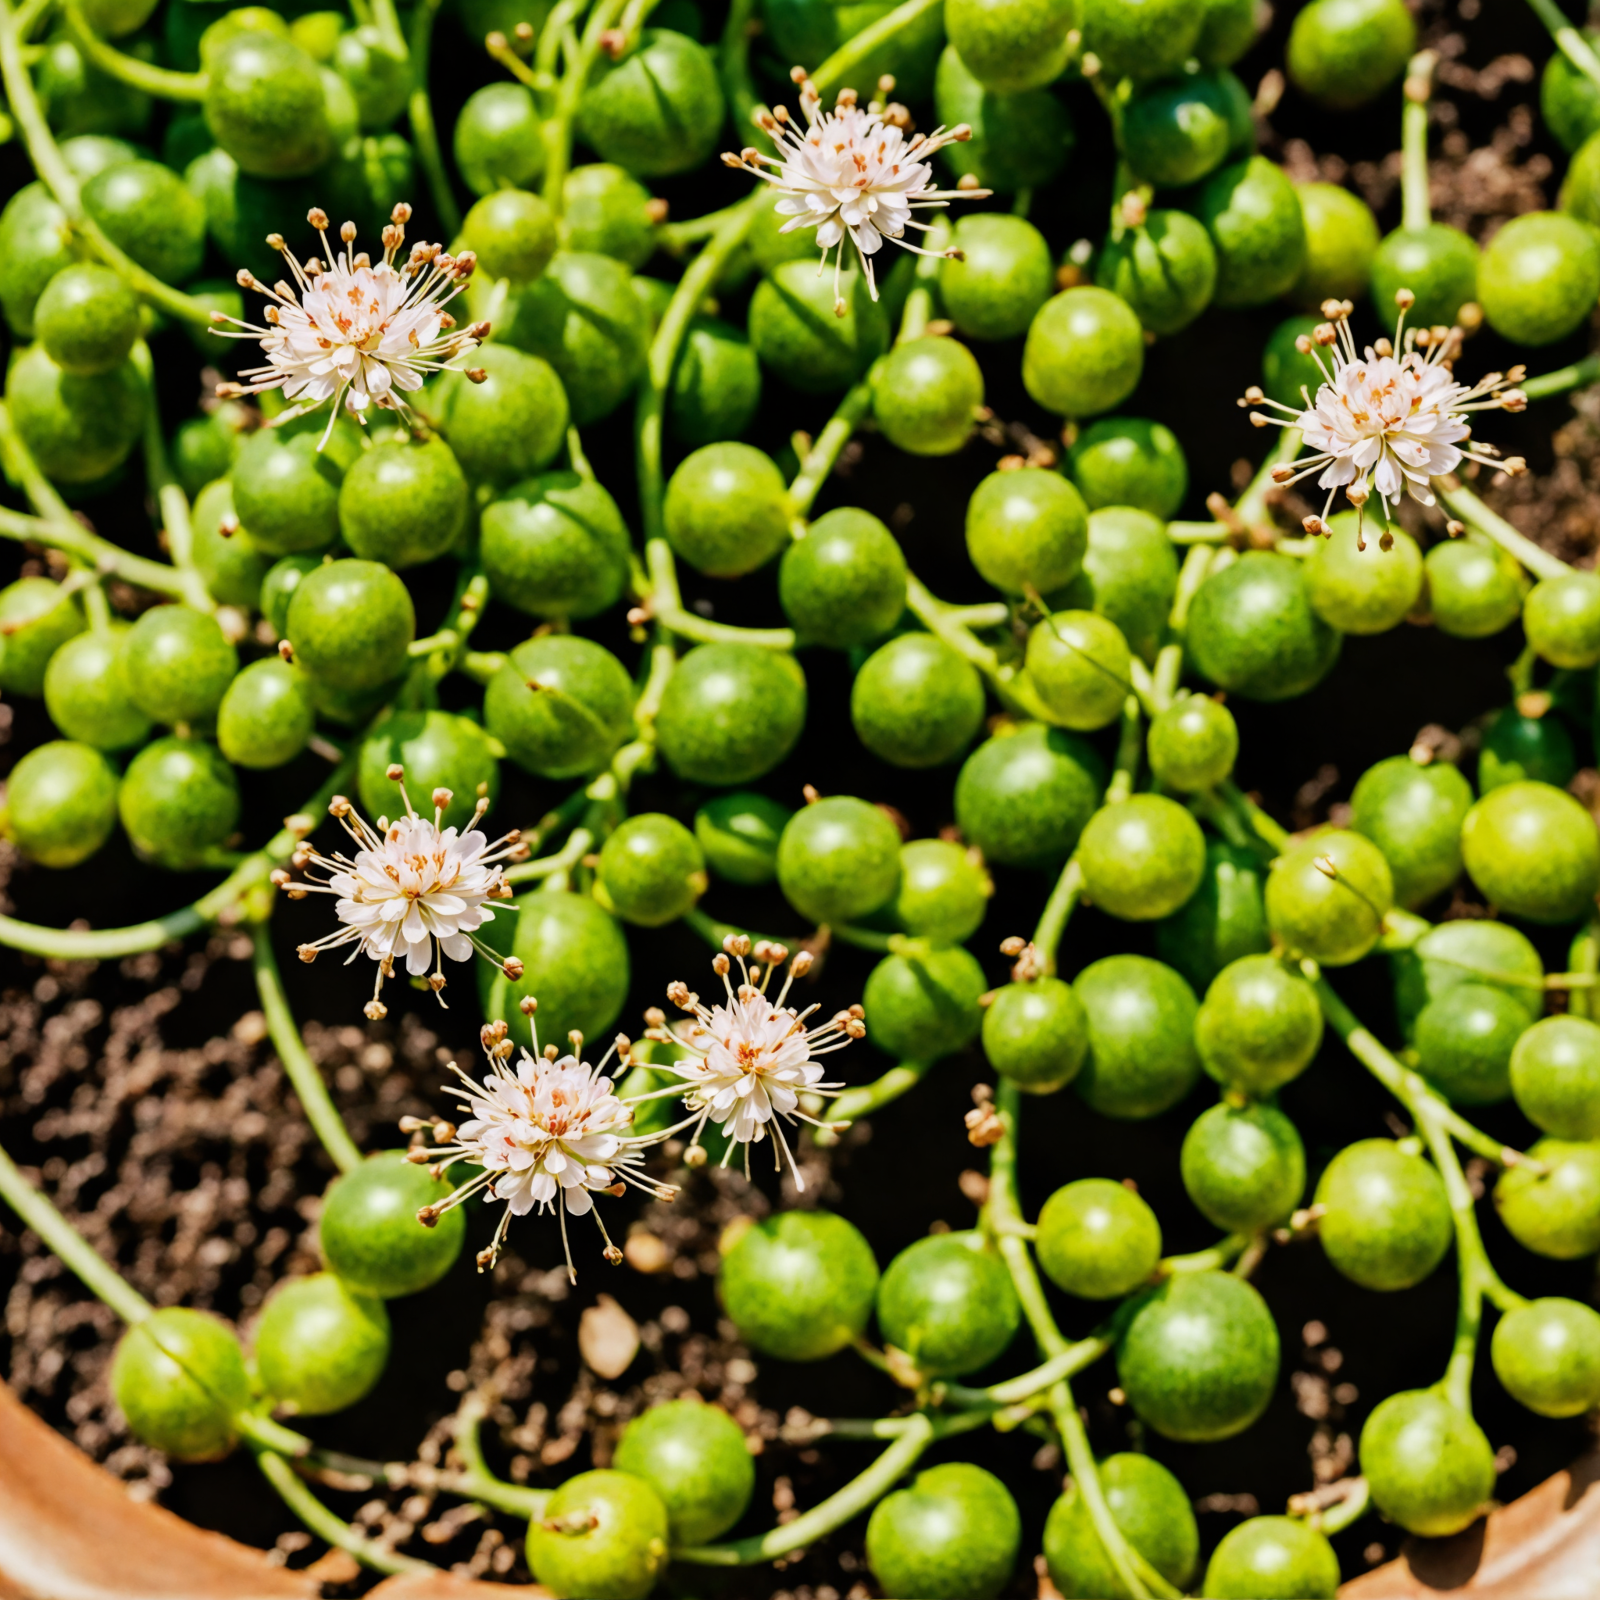 Curio rowleyanus (String of Pearls) in a planter, with trailing vines and spherical leaves, against a dark background.